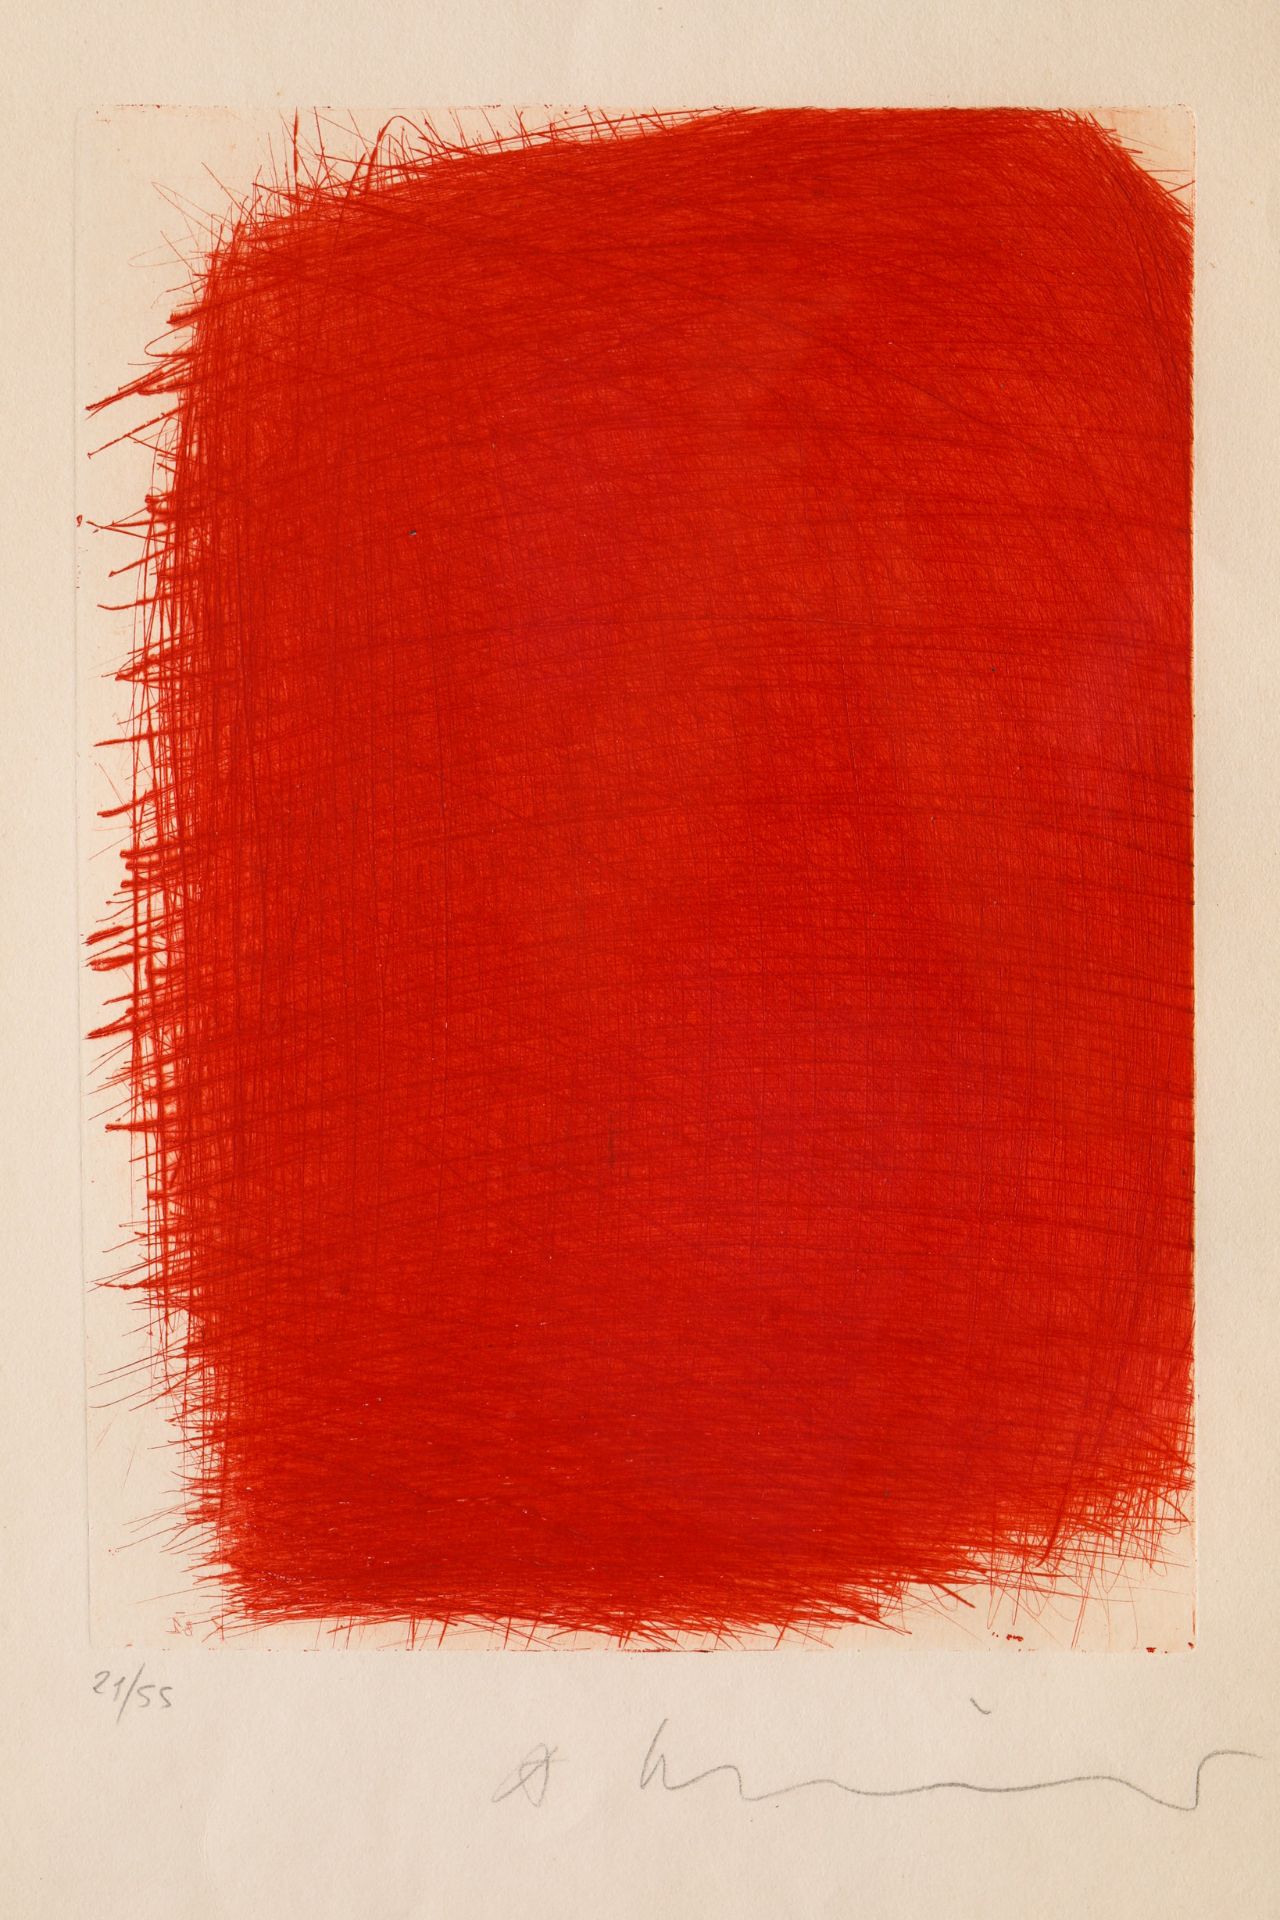 Arnulf Rainer*, Untitled, 1981, Etching in red, signed